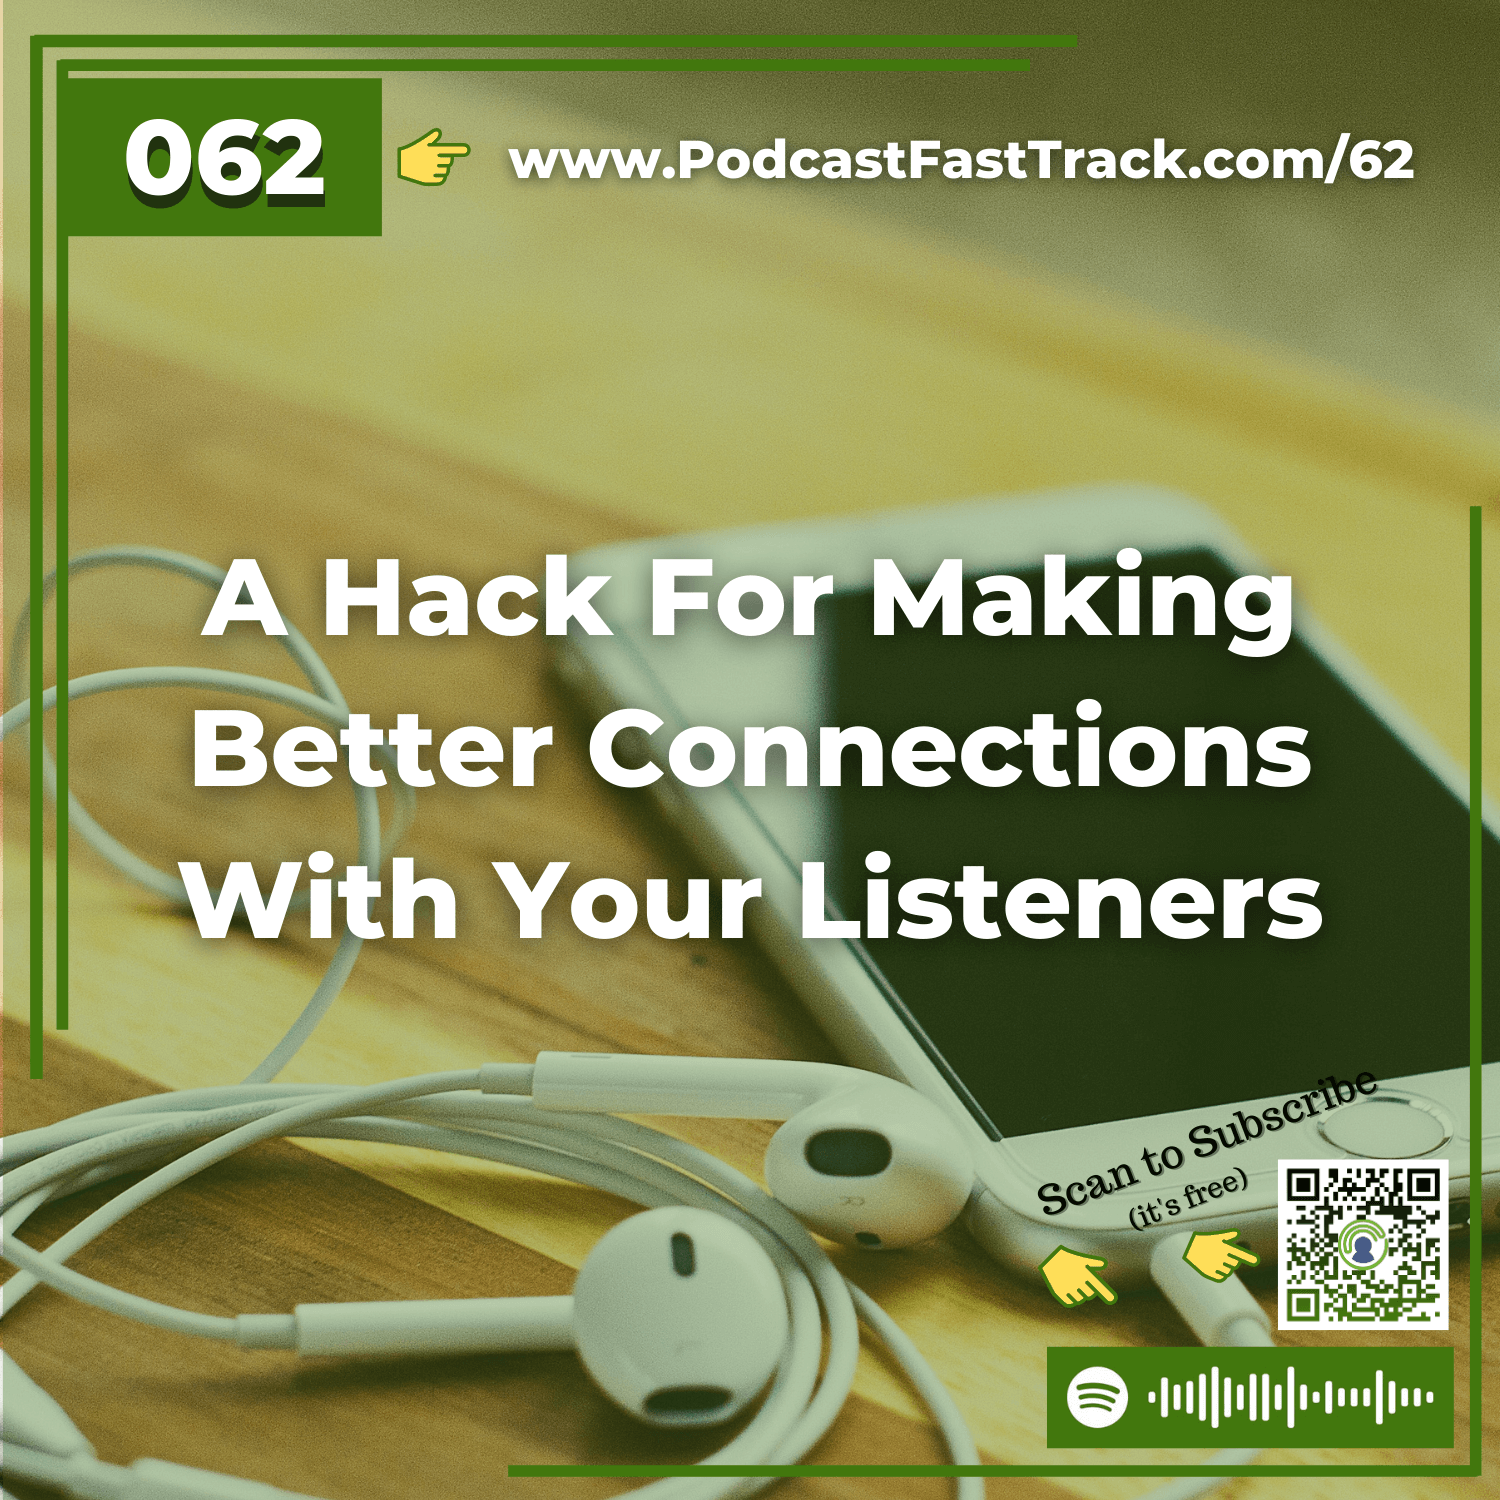 62: A Hack For Making Better Connections With Your Listeners